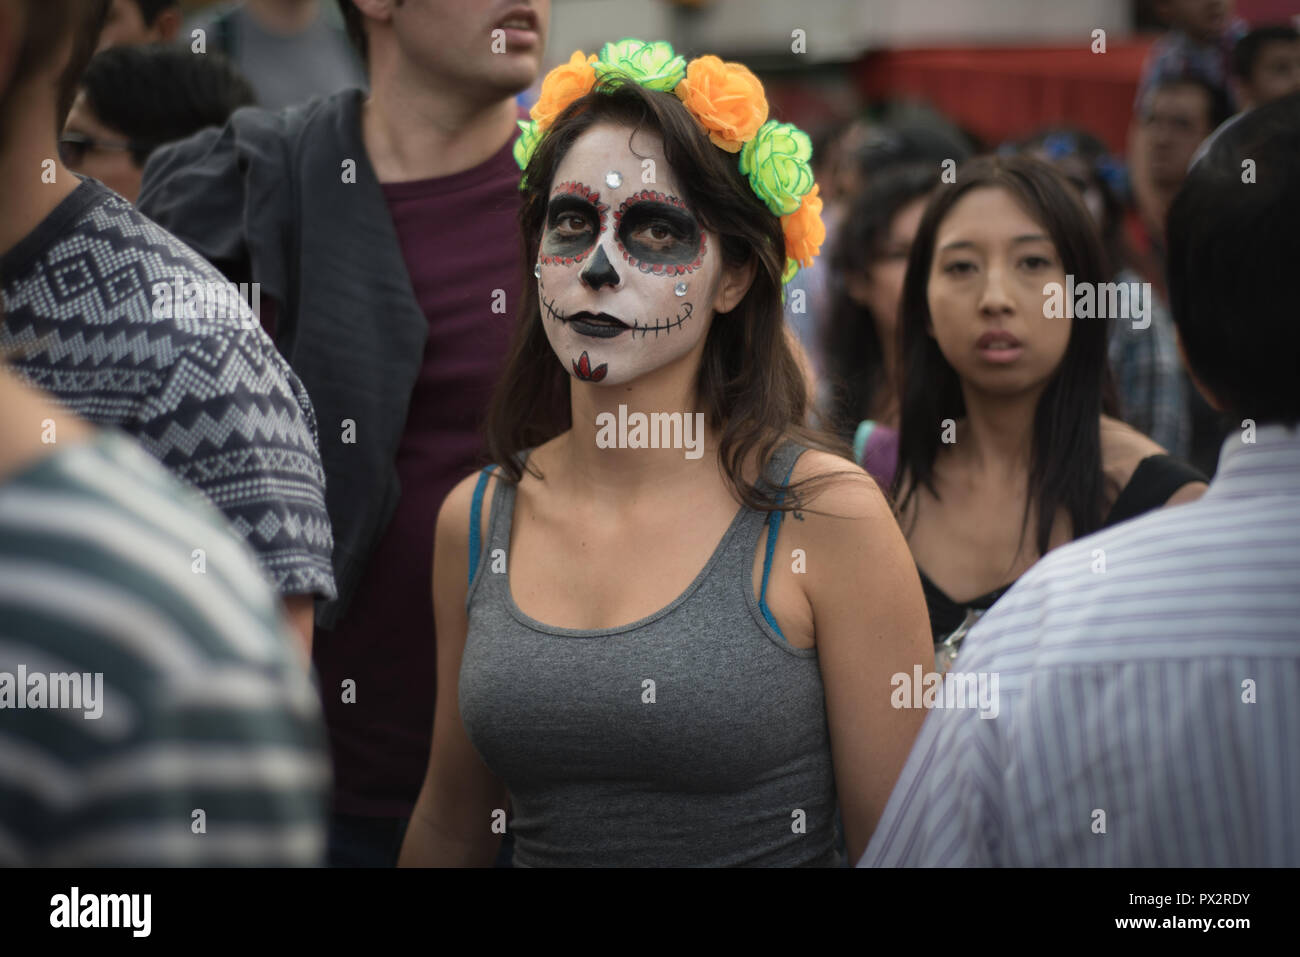 A young woman wearing typical 'catrina' makeup at Mexico City's Day of the Dead parade Stock Photo